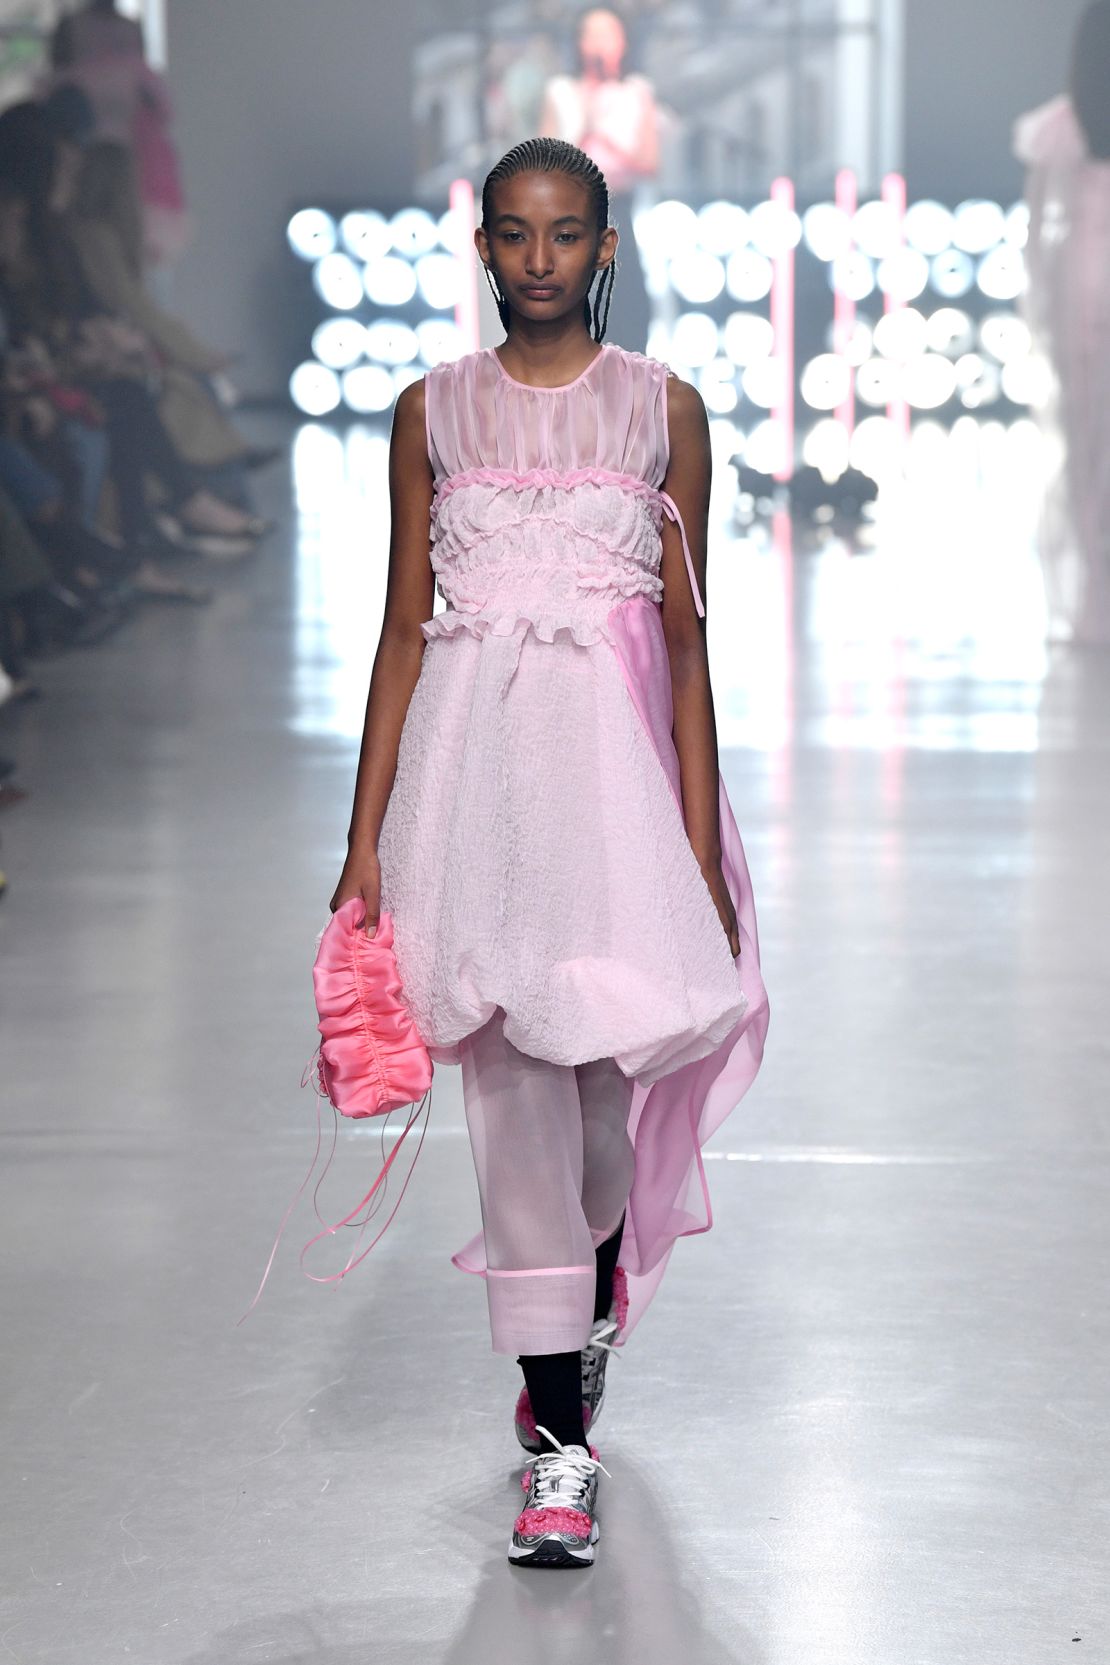 Frilly, feminine and fun was the dresscode at Cecile Bahnsen.